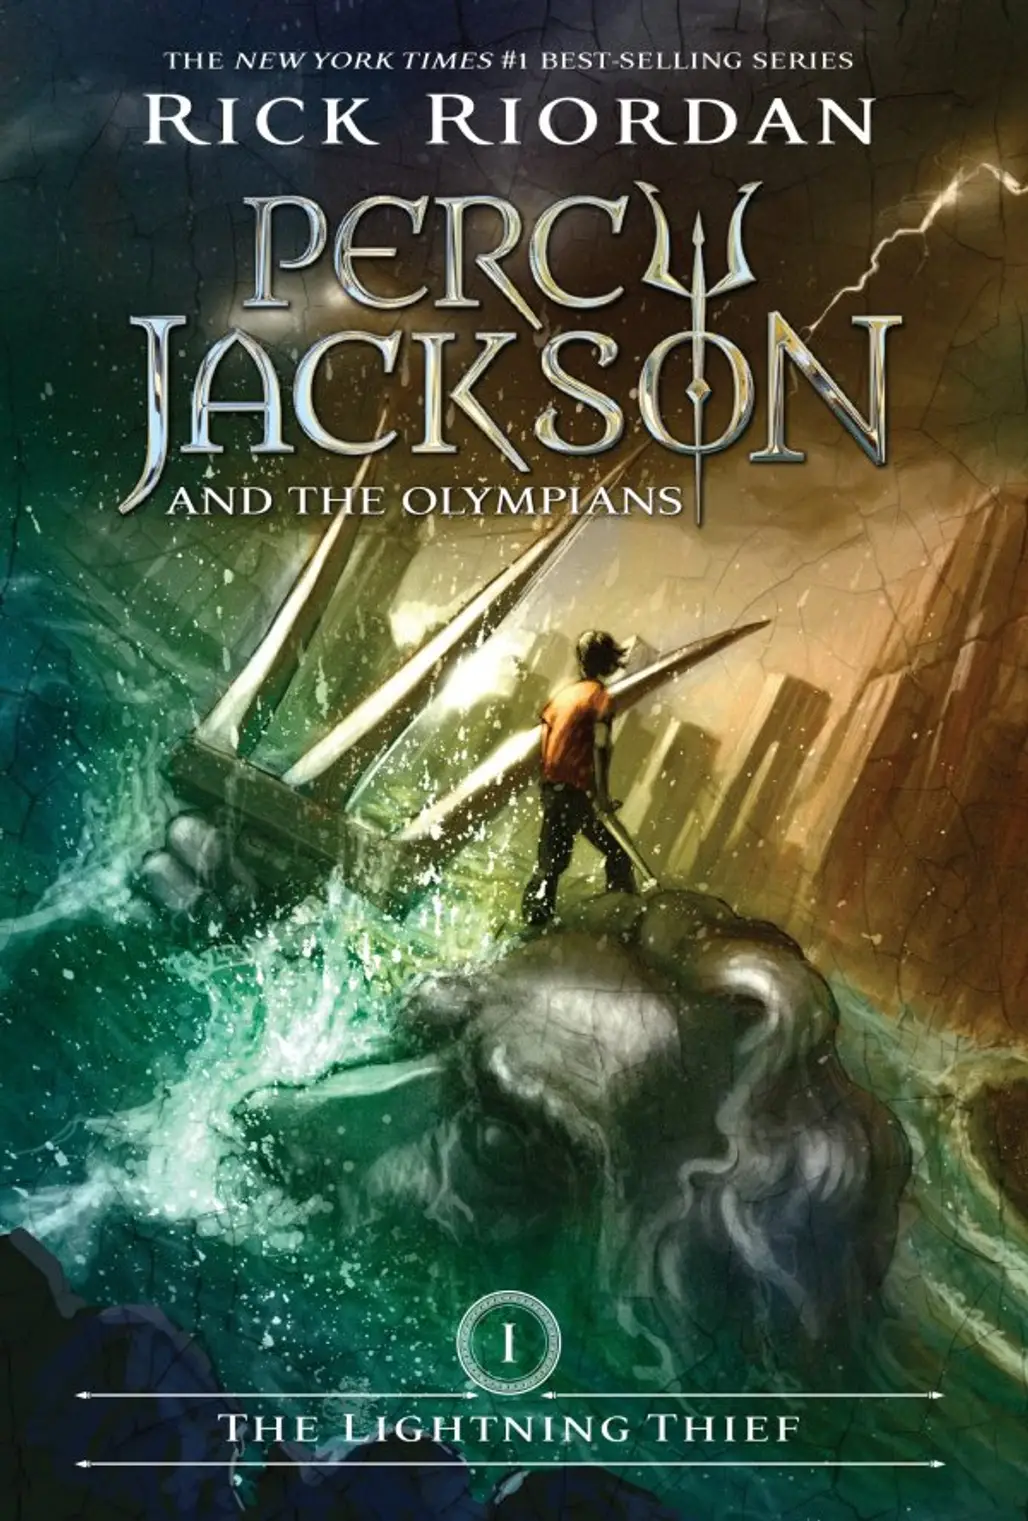 The Lightning Thief (Percy Jackson and the Olympians, Book 1) by Rick Riordan